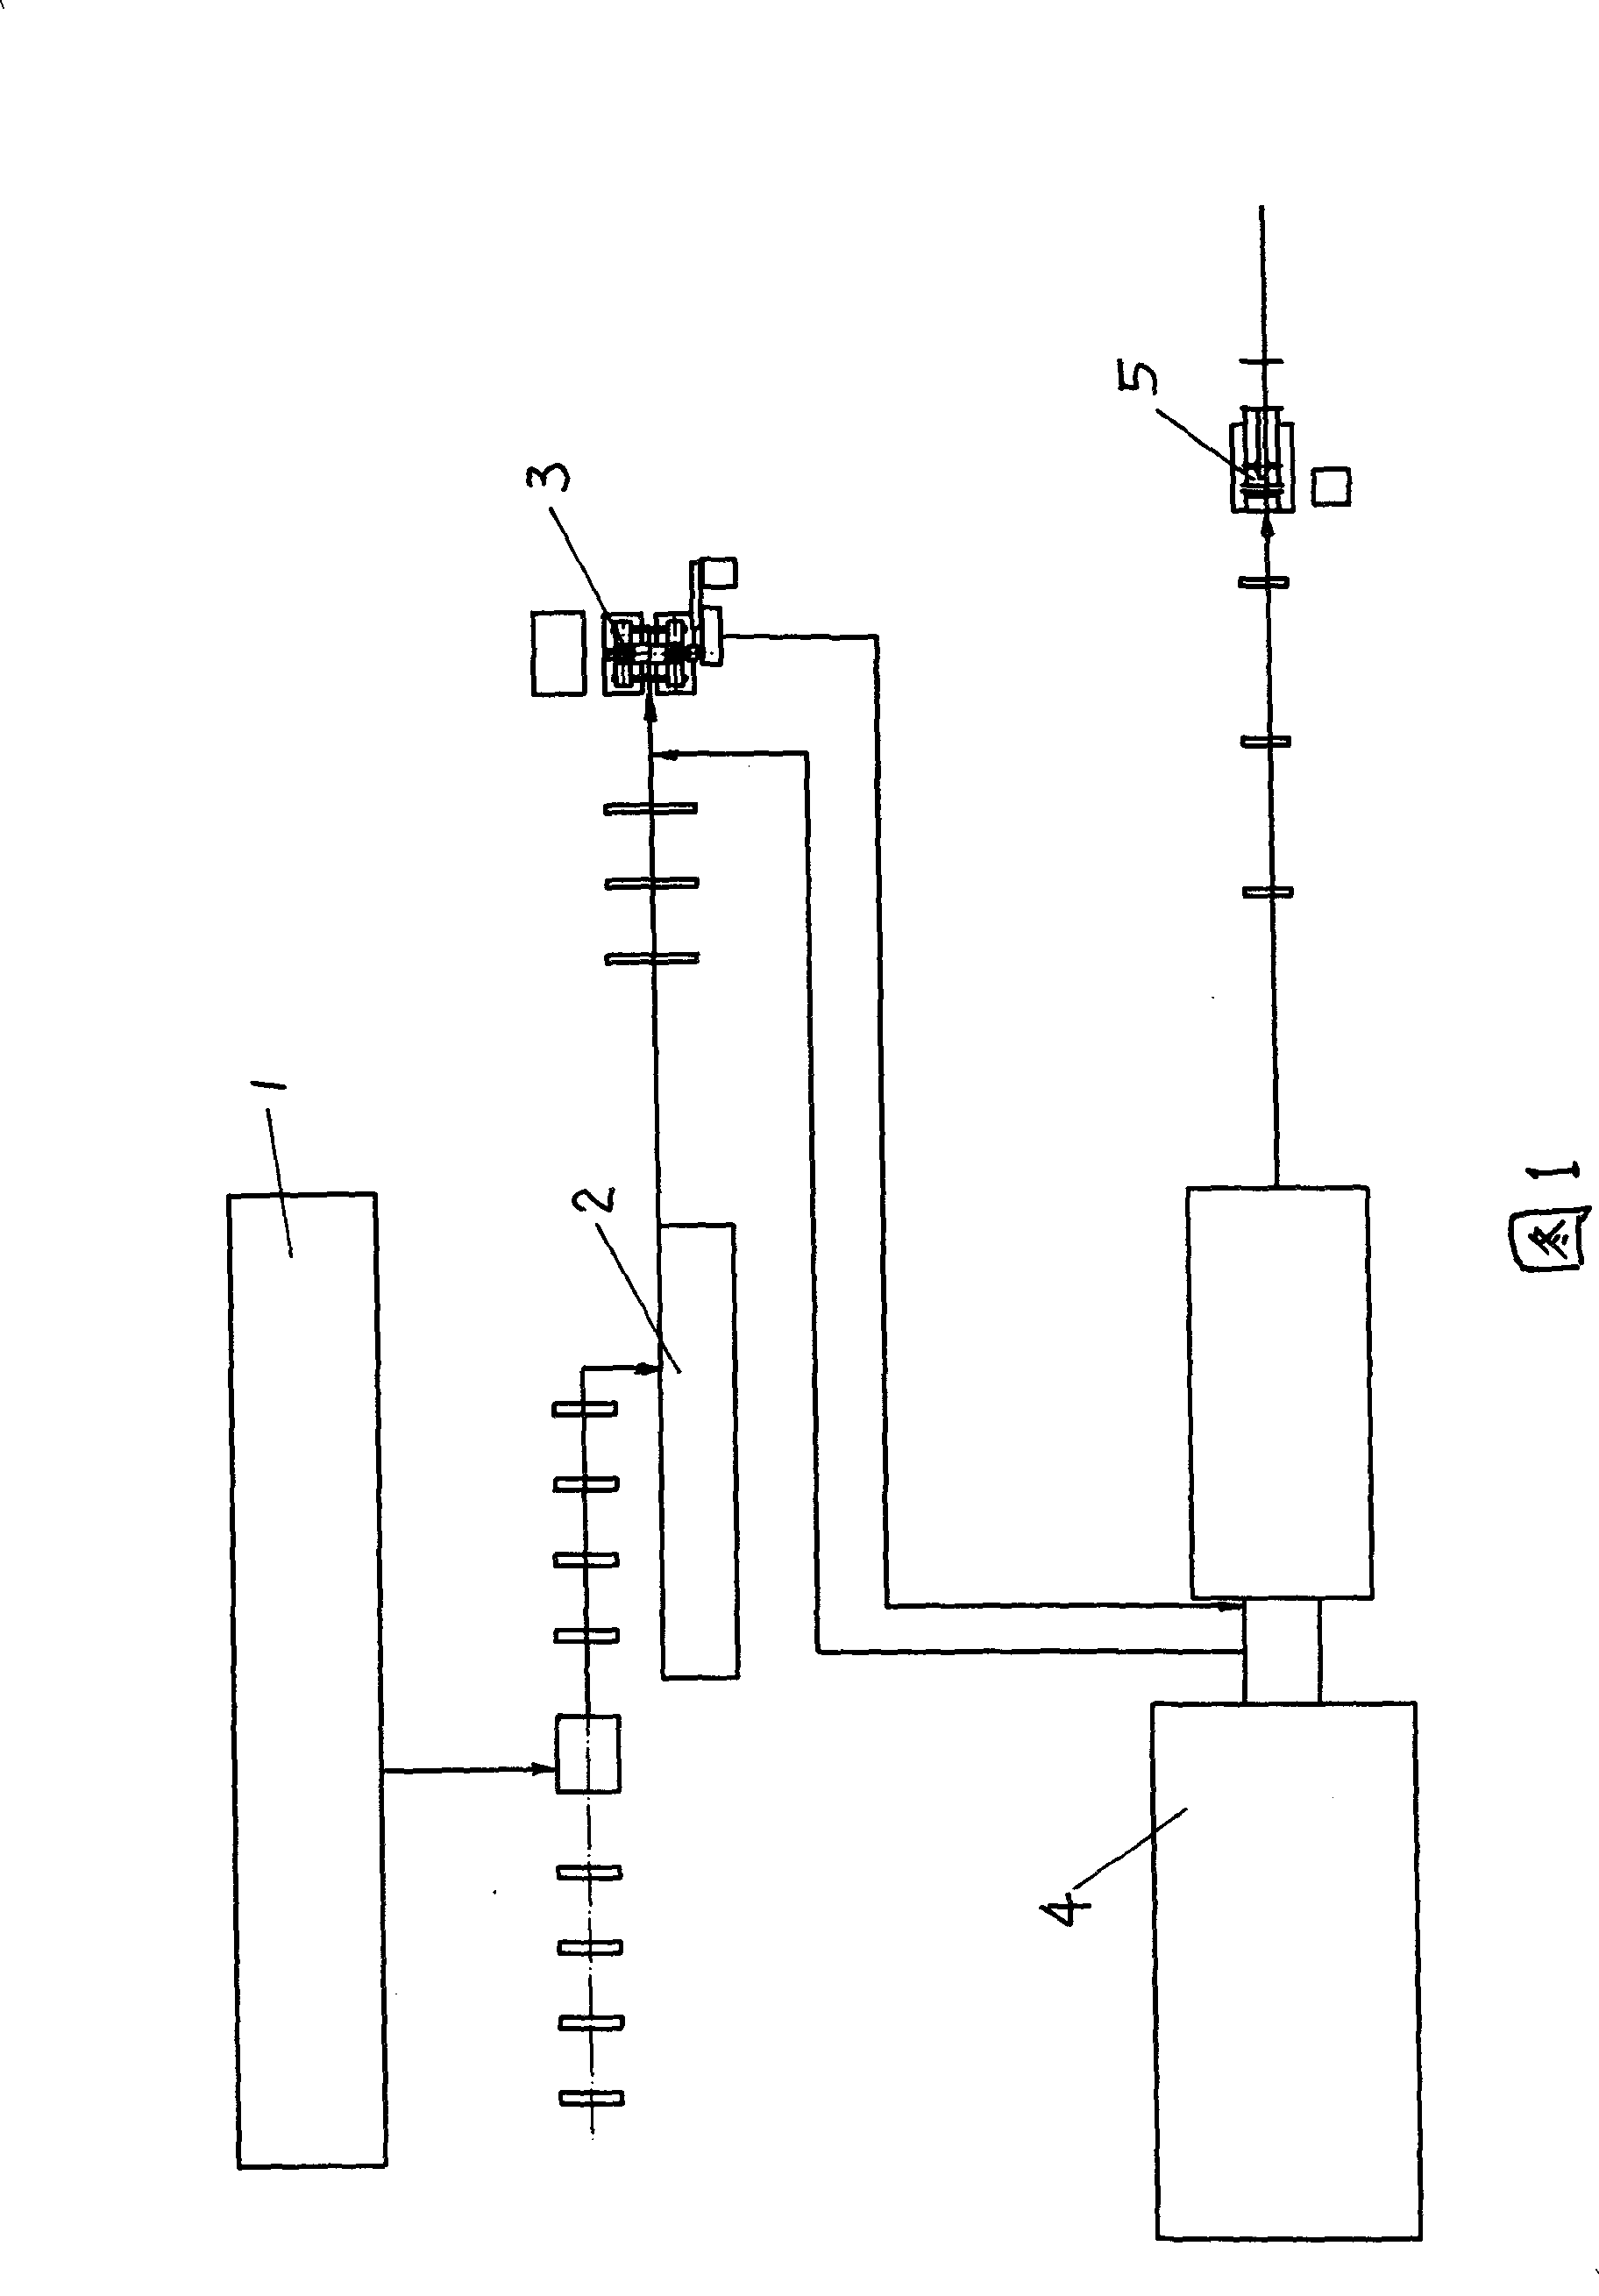 Copper coated aluminum bus bank production method and apparatus